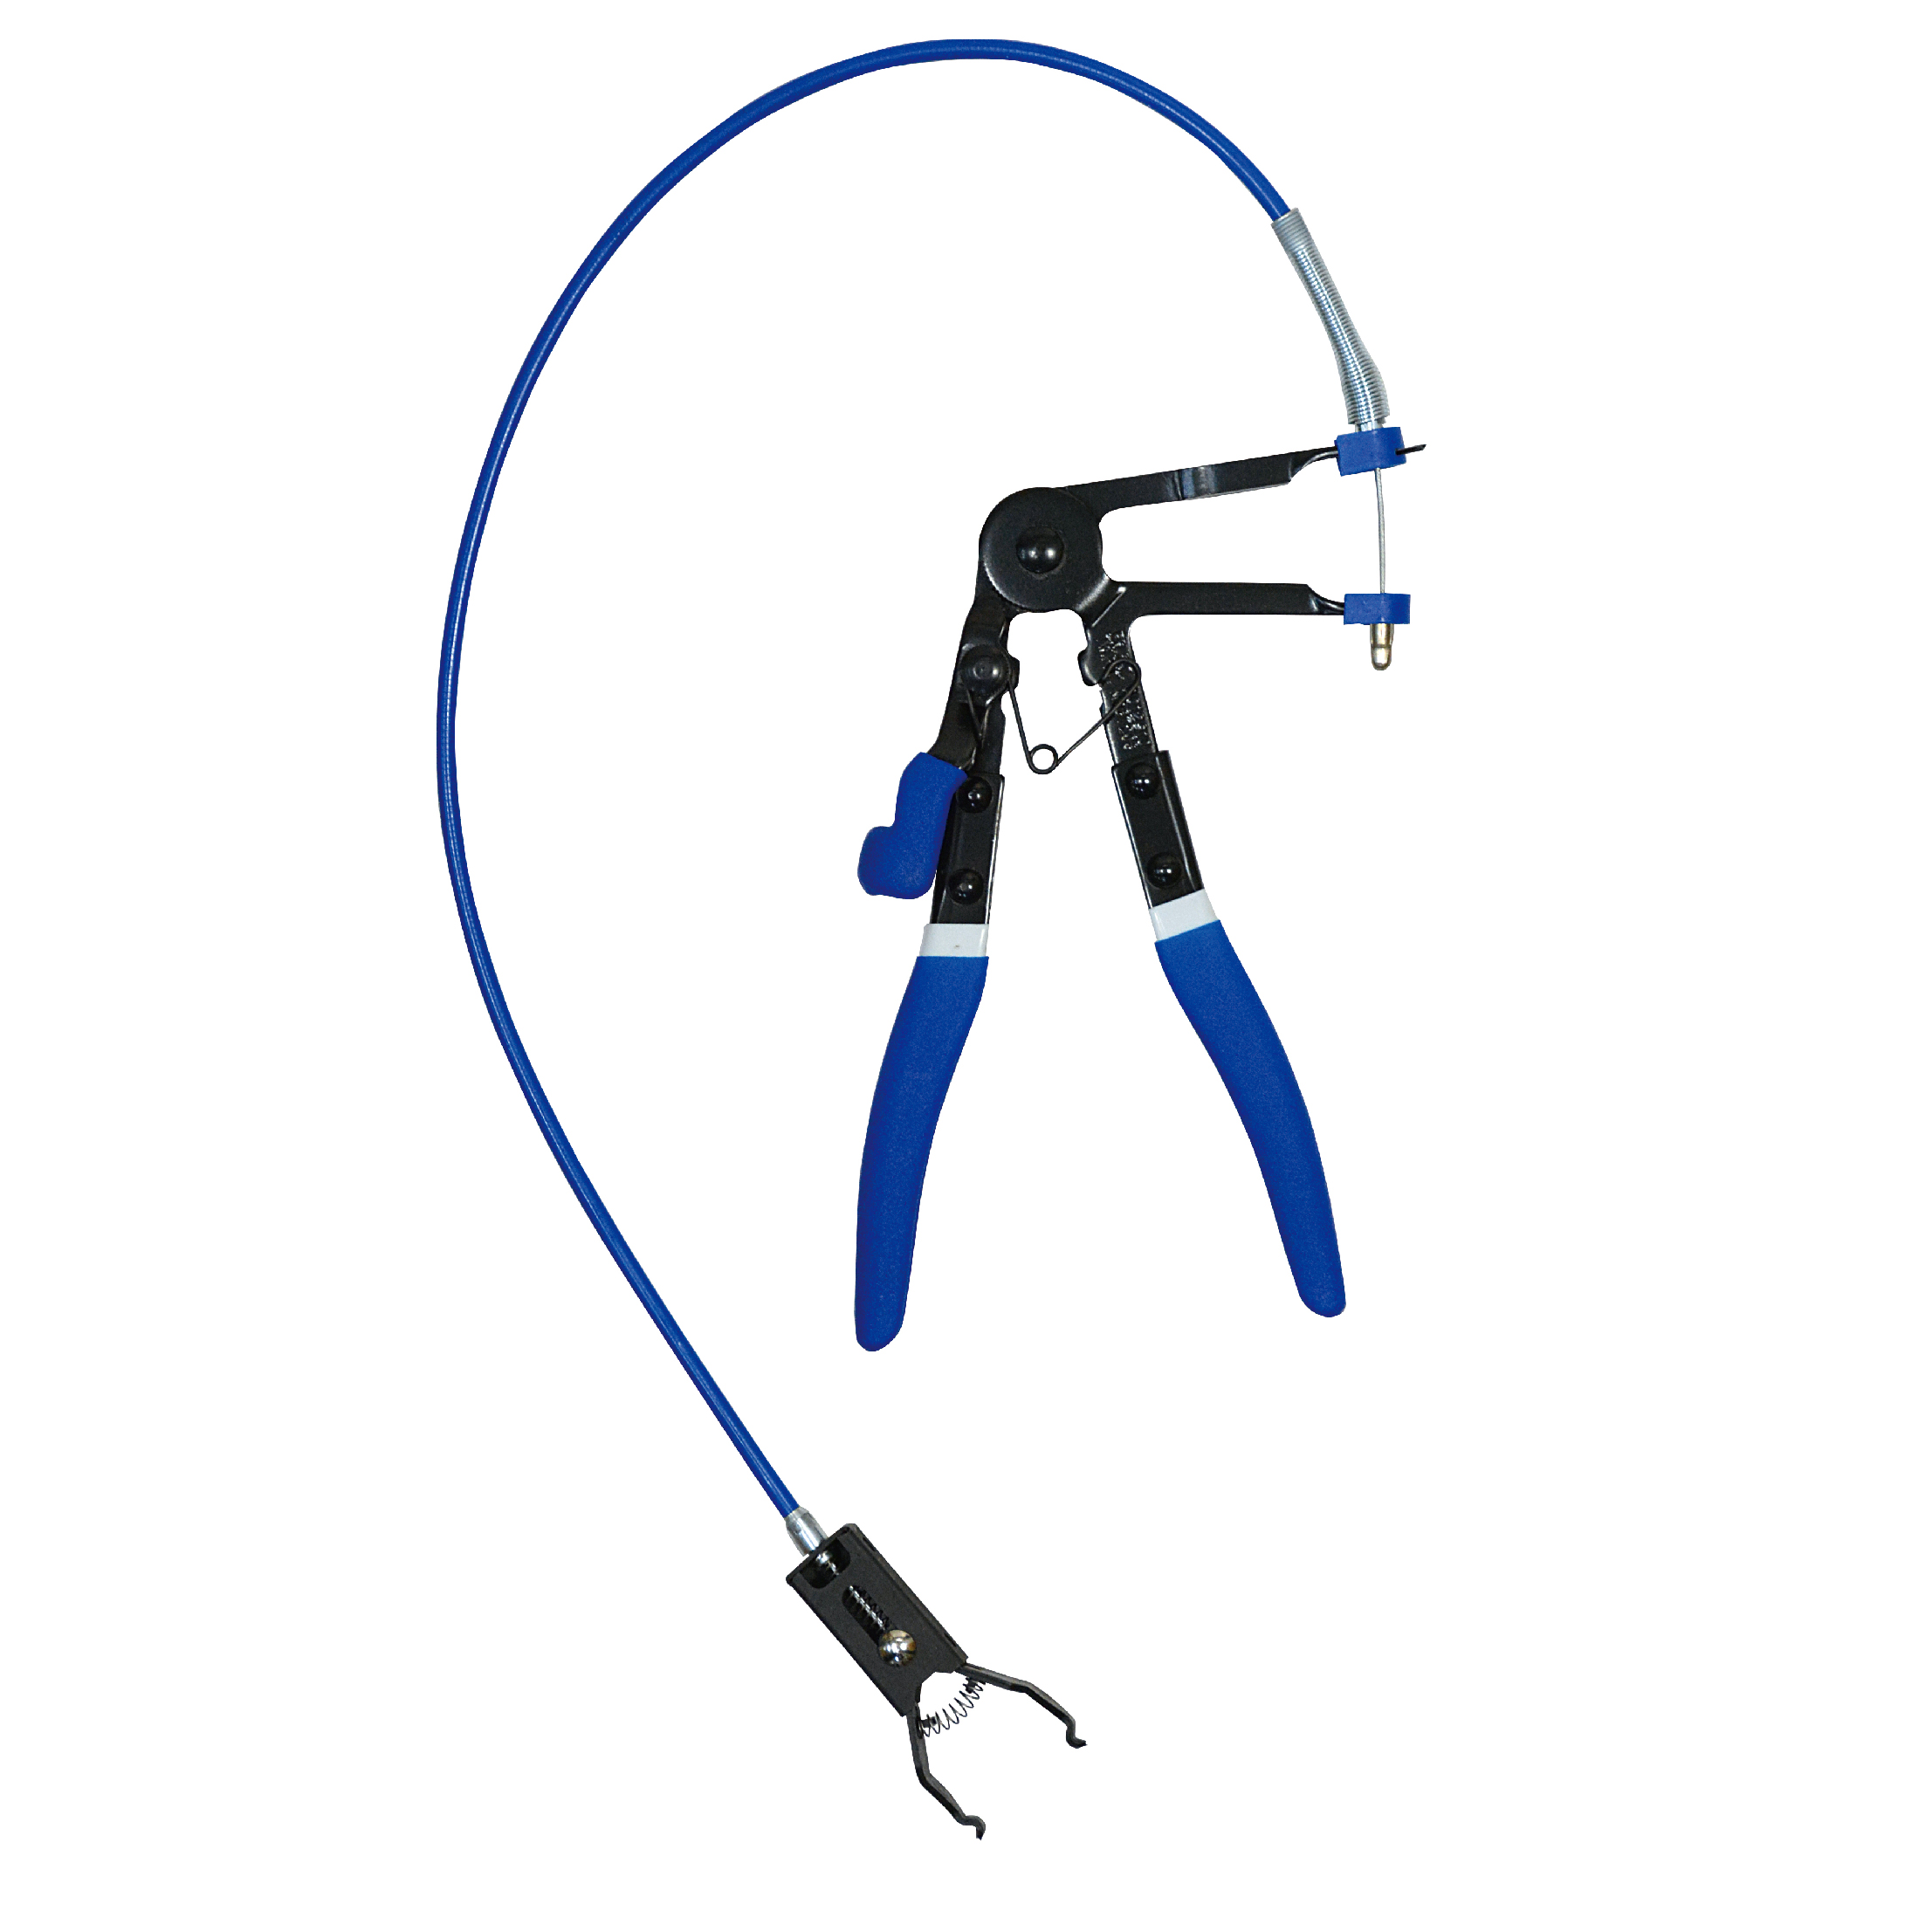 BUTTON CONNECTOR PLIERS WITH FLEXIBLE CABLE					